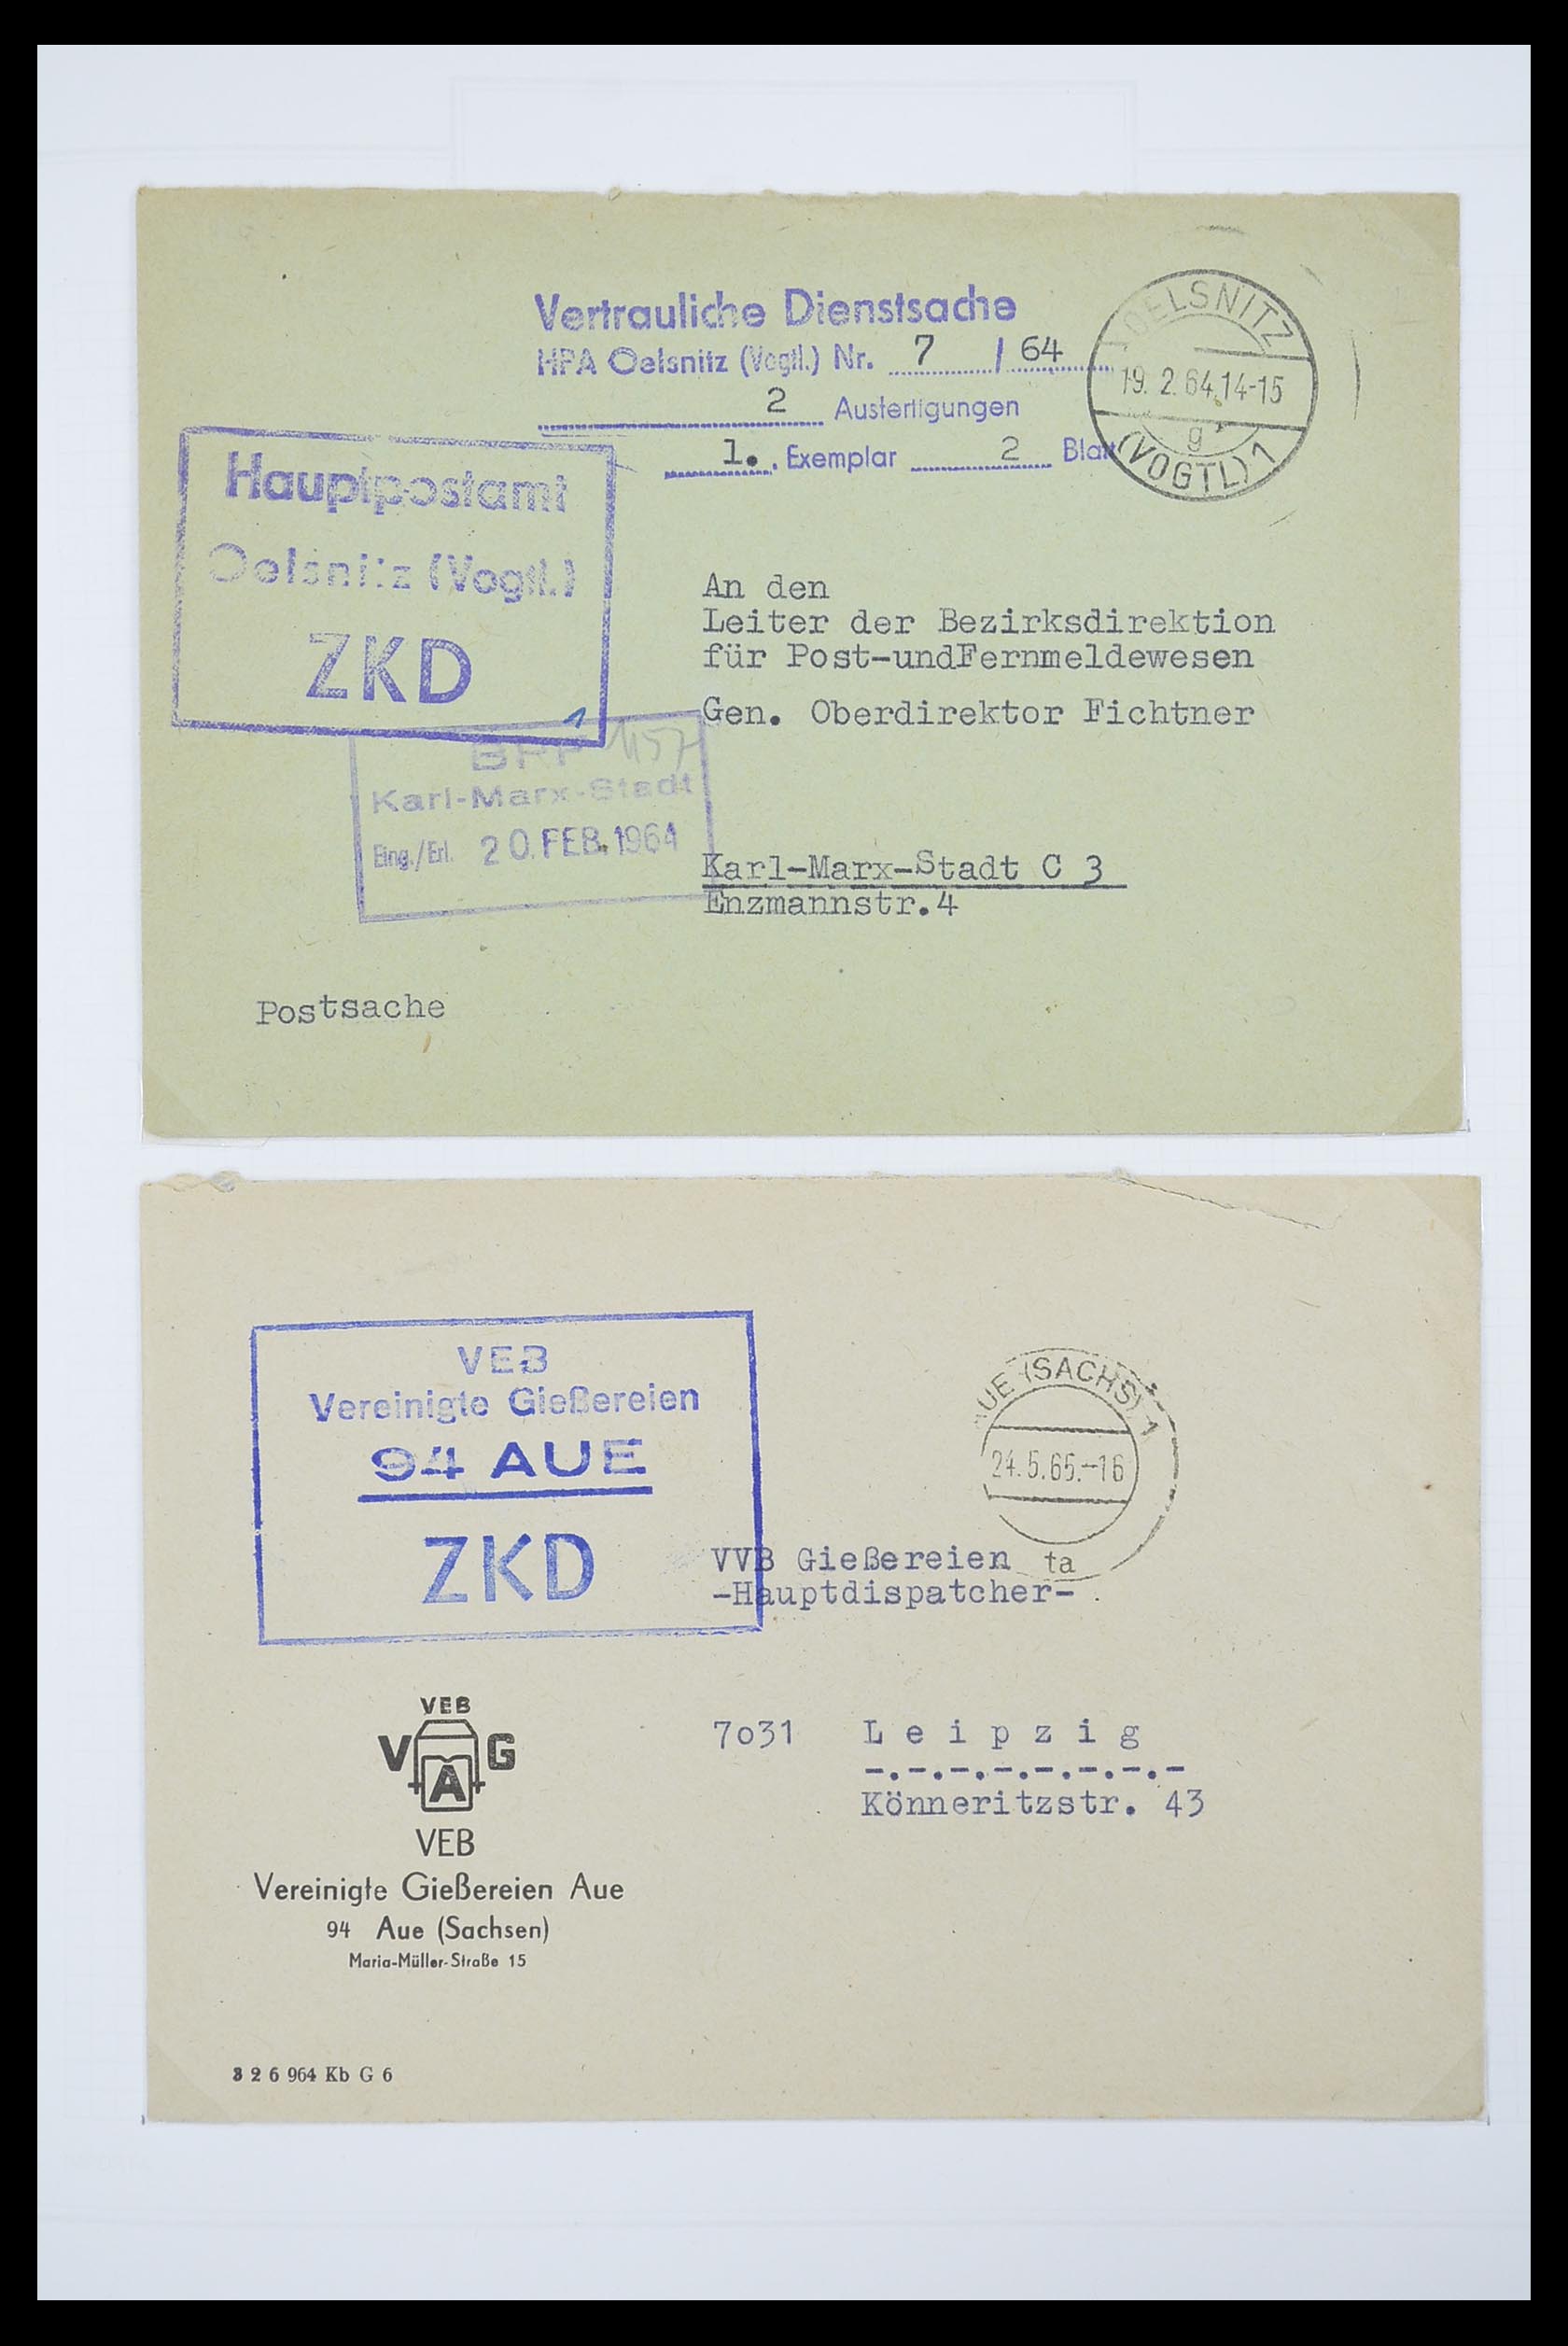 33883 016 - Stamp collection 33883 DDR service covers 1956-1986.